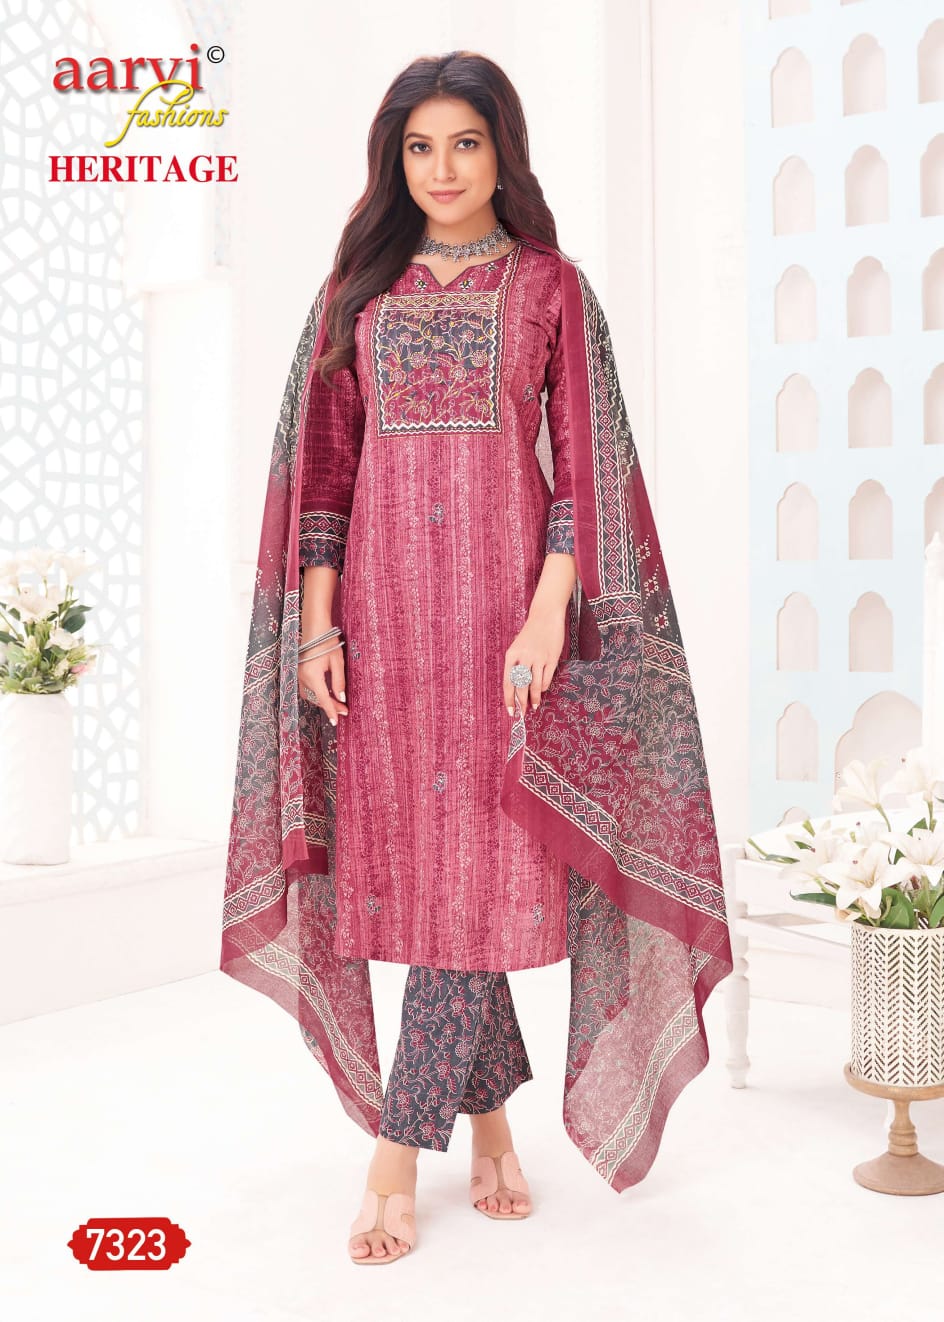 Heritage Vol 1 Aarvi Fashions Cotton Pant Style Suits